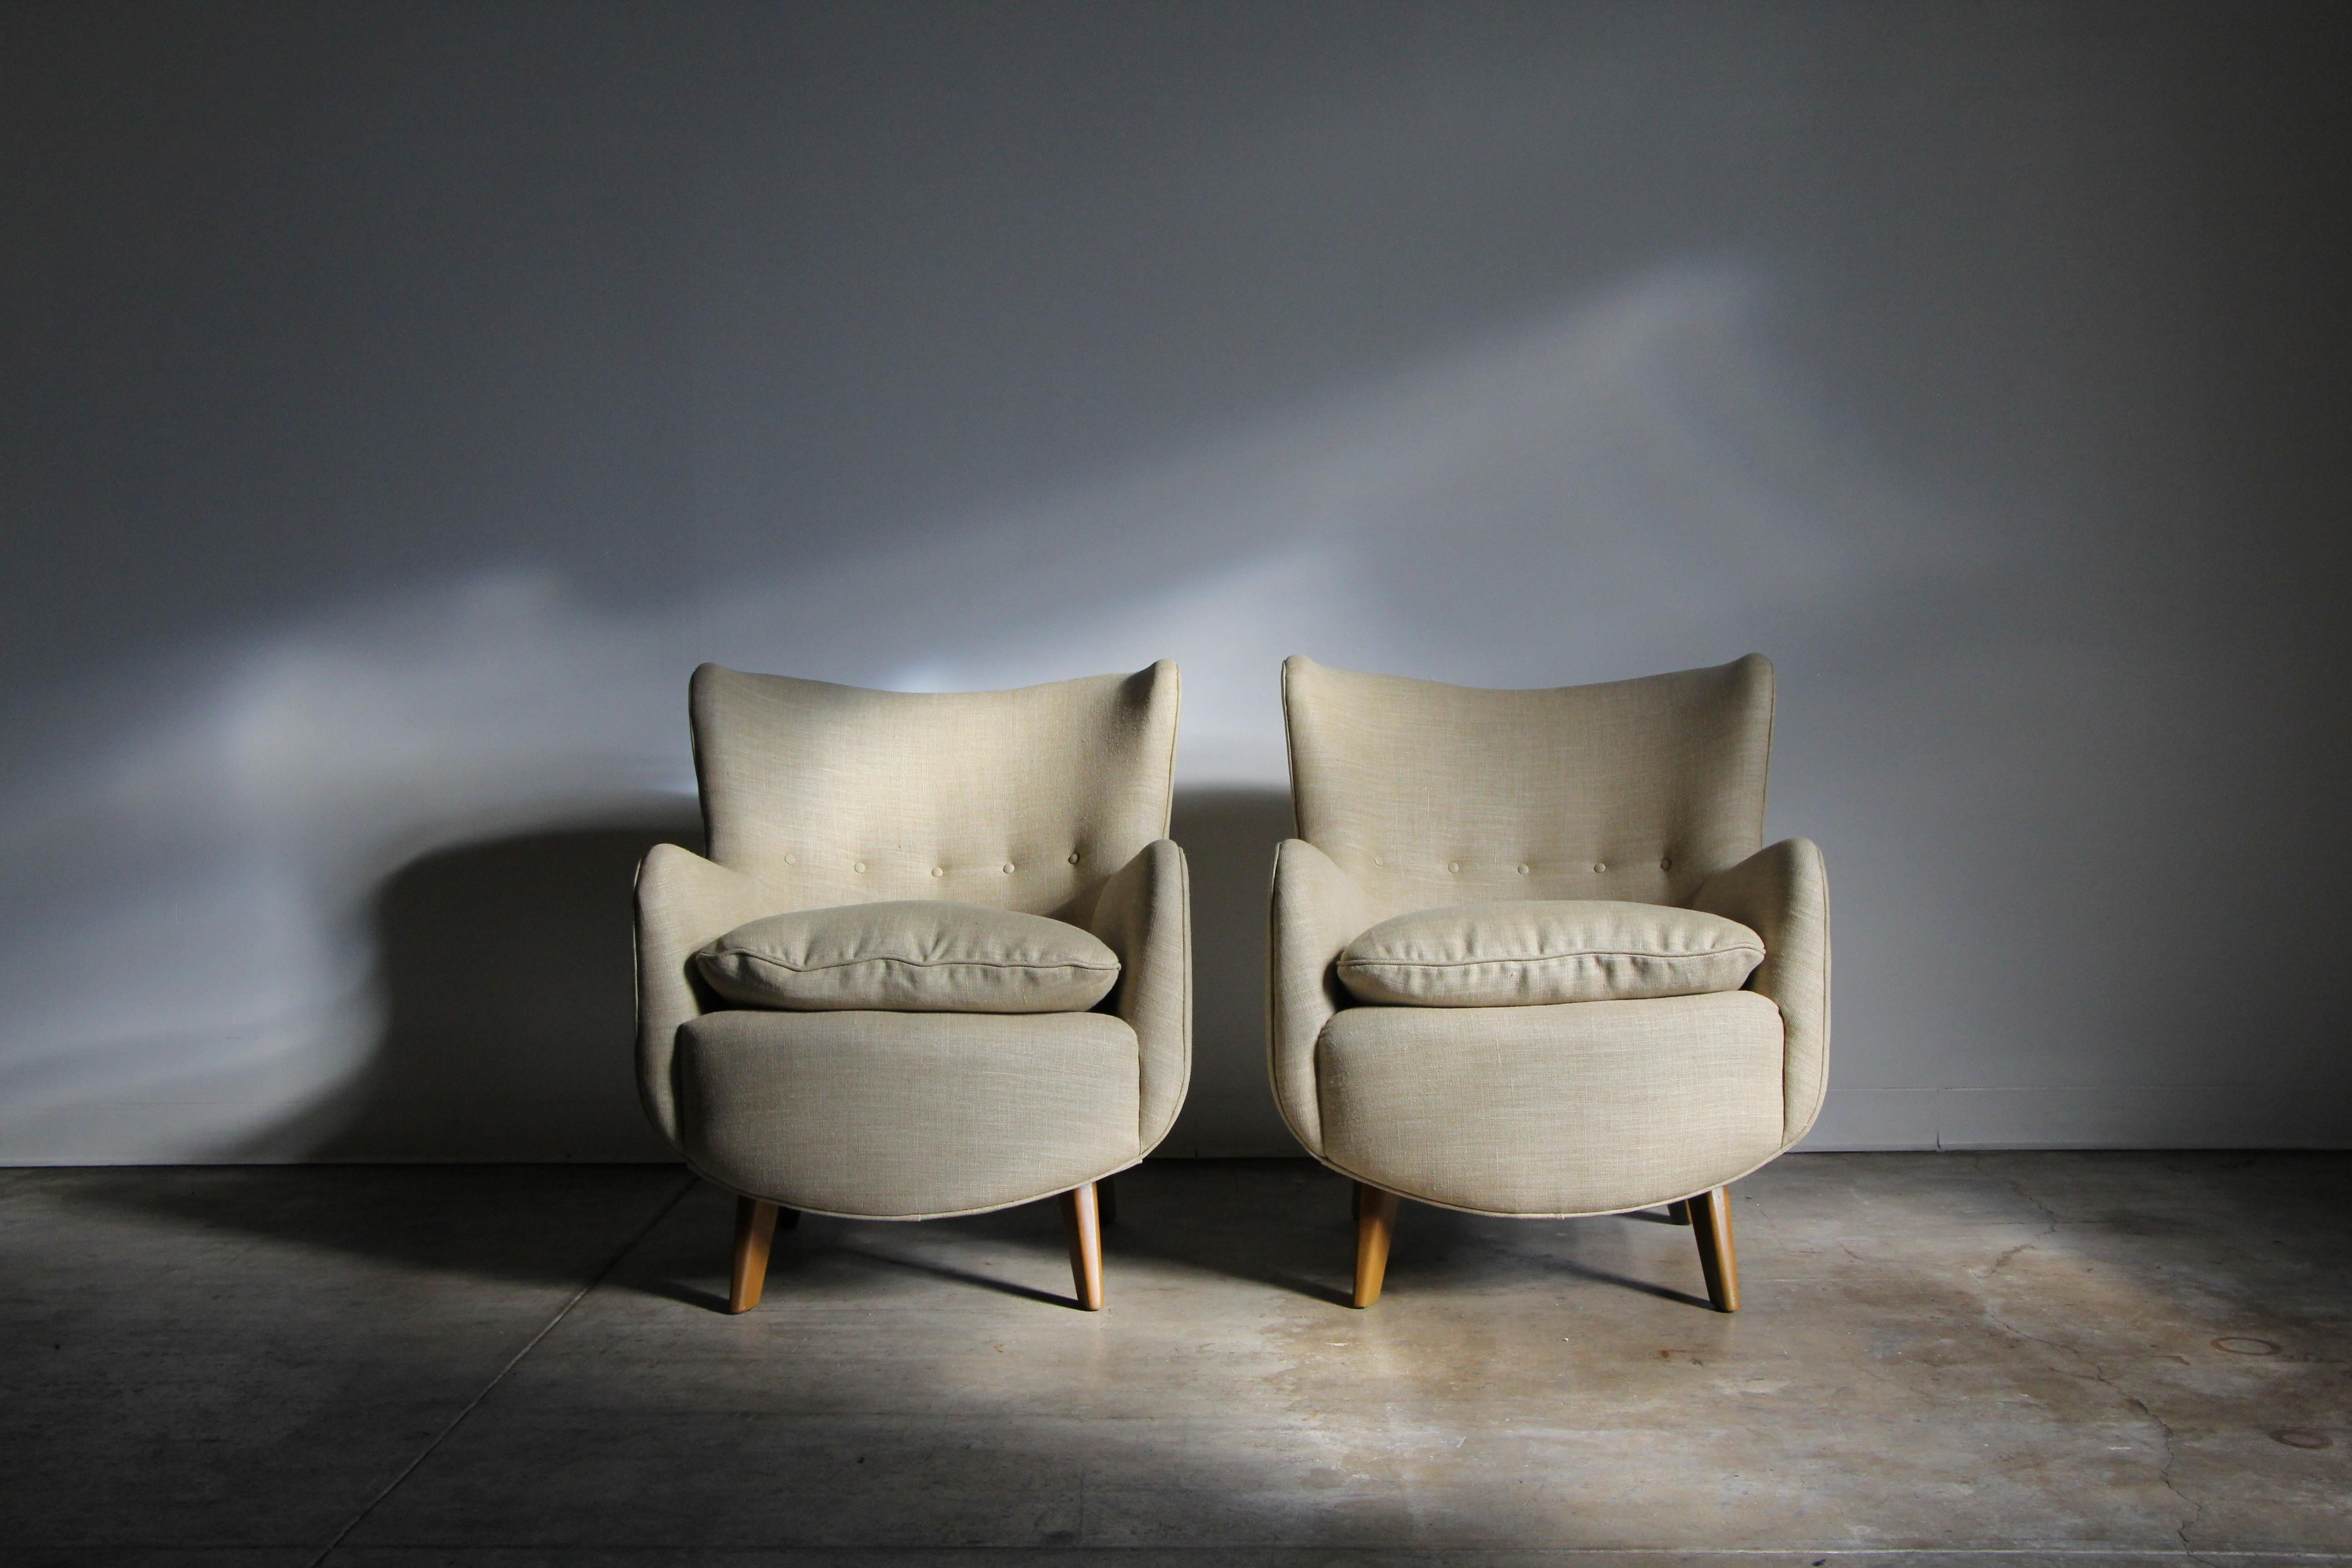 A stunning and exceptionally uncommon pair of George Nelson model '4688' wingback lounge chairs designed for Herman Miller in the 1940s. These petite lounge chairs embody understated elegance, with flowing lines, curved, hugging backs, and flared,